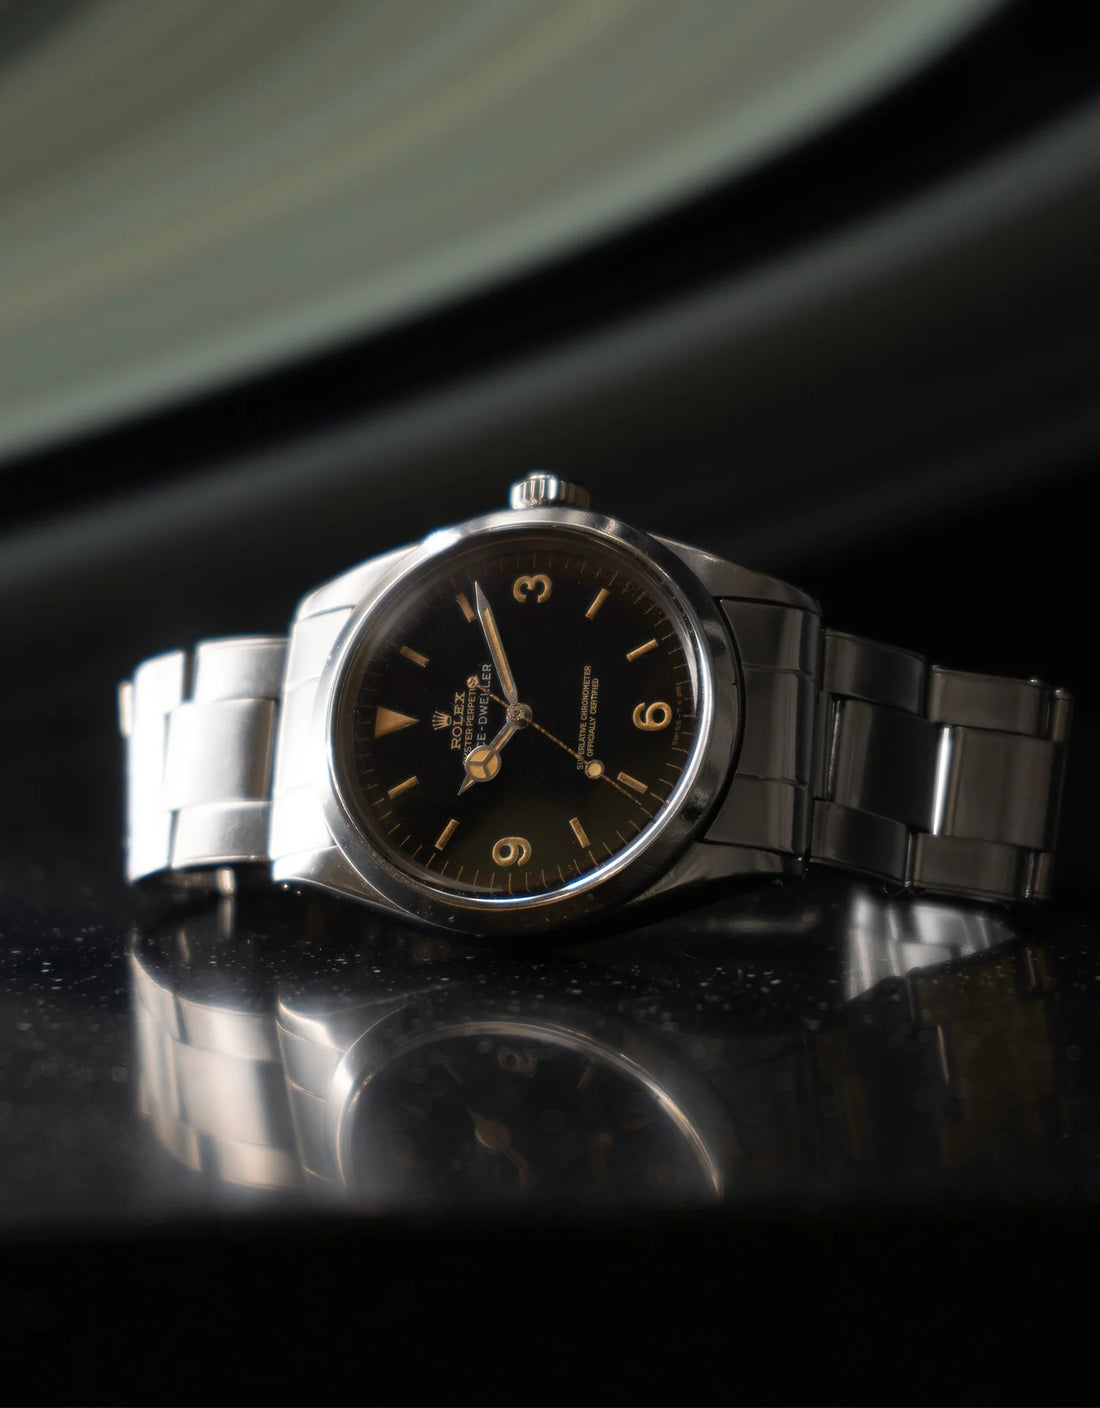 The Ultra-Rare Rolex Making Up for Lost Time